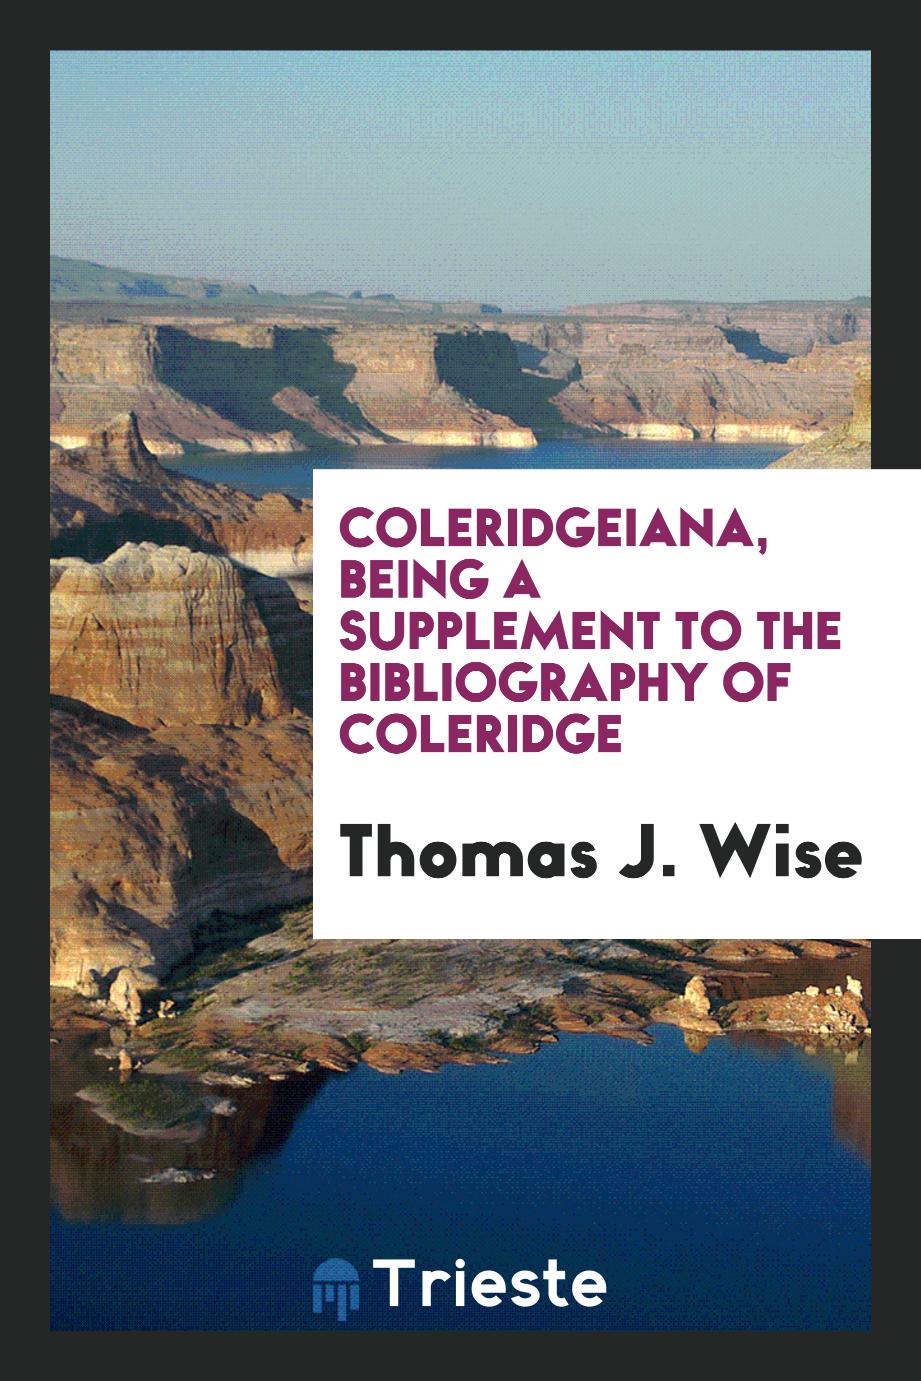 Thomas J. Wise - Coleridgeiana, being a supplement to the Bibliography of Coleridge